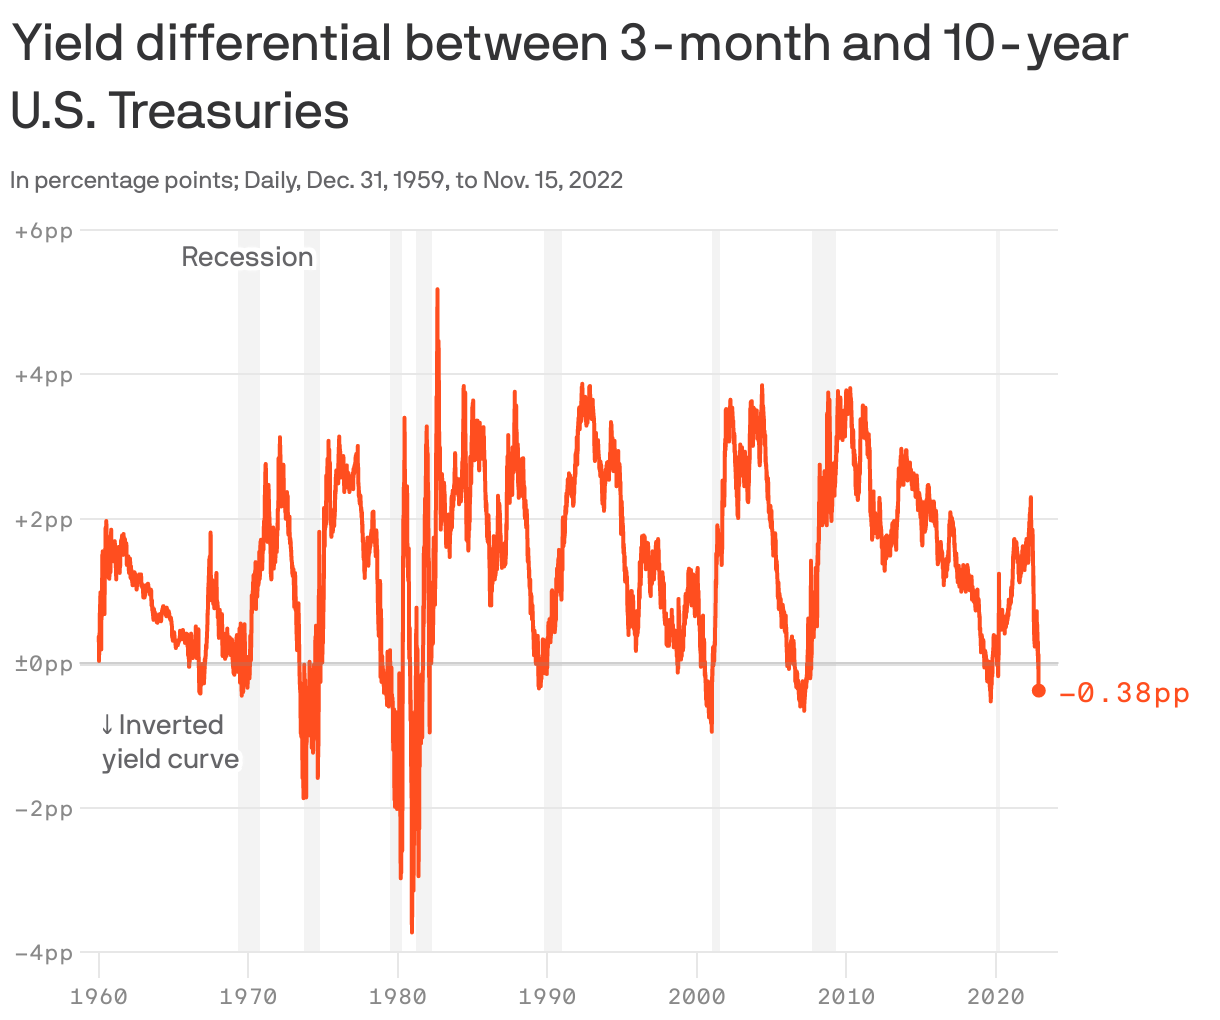 Yield differential between 3-month and 10-year U.S. Treasuries